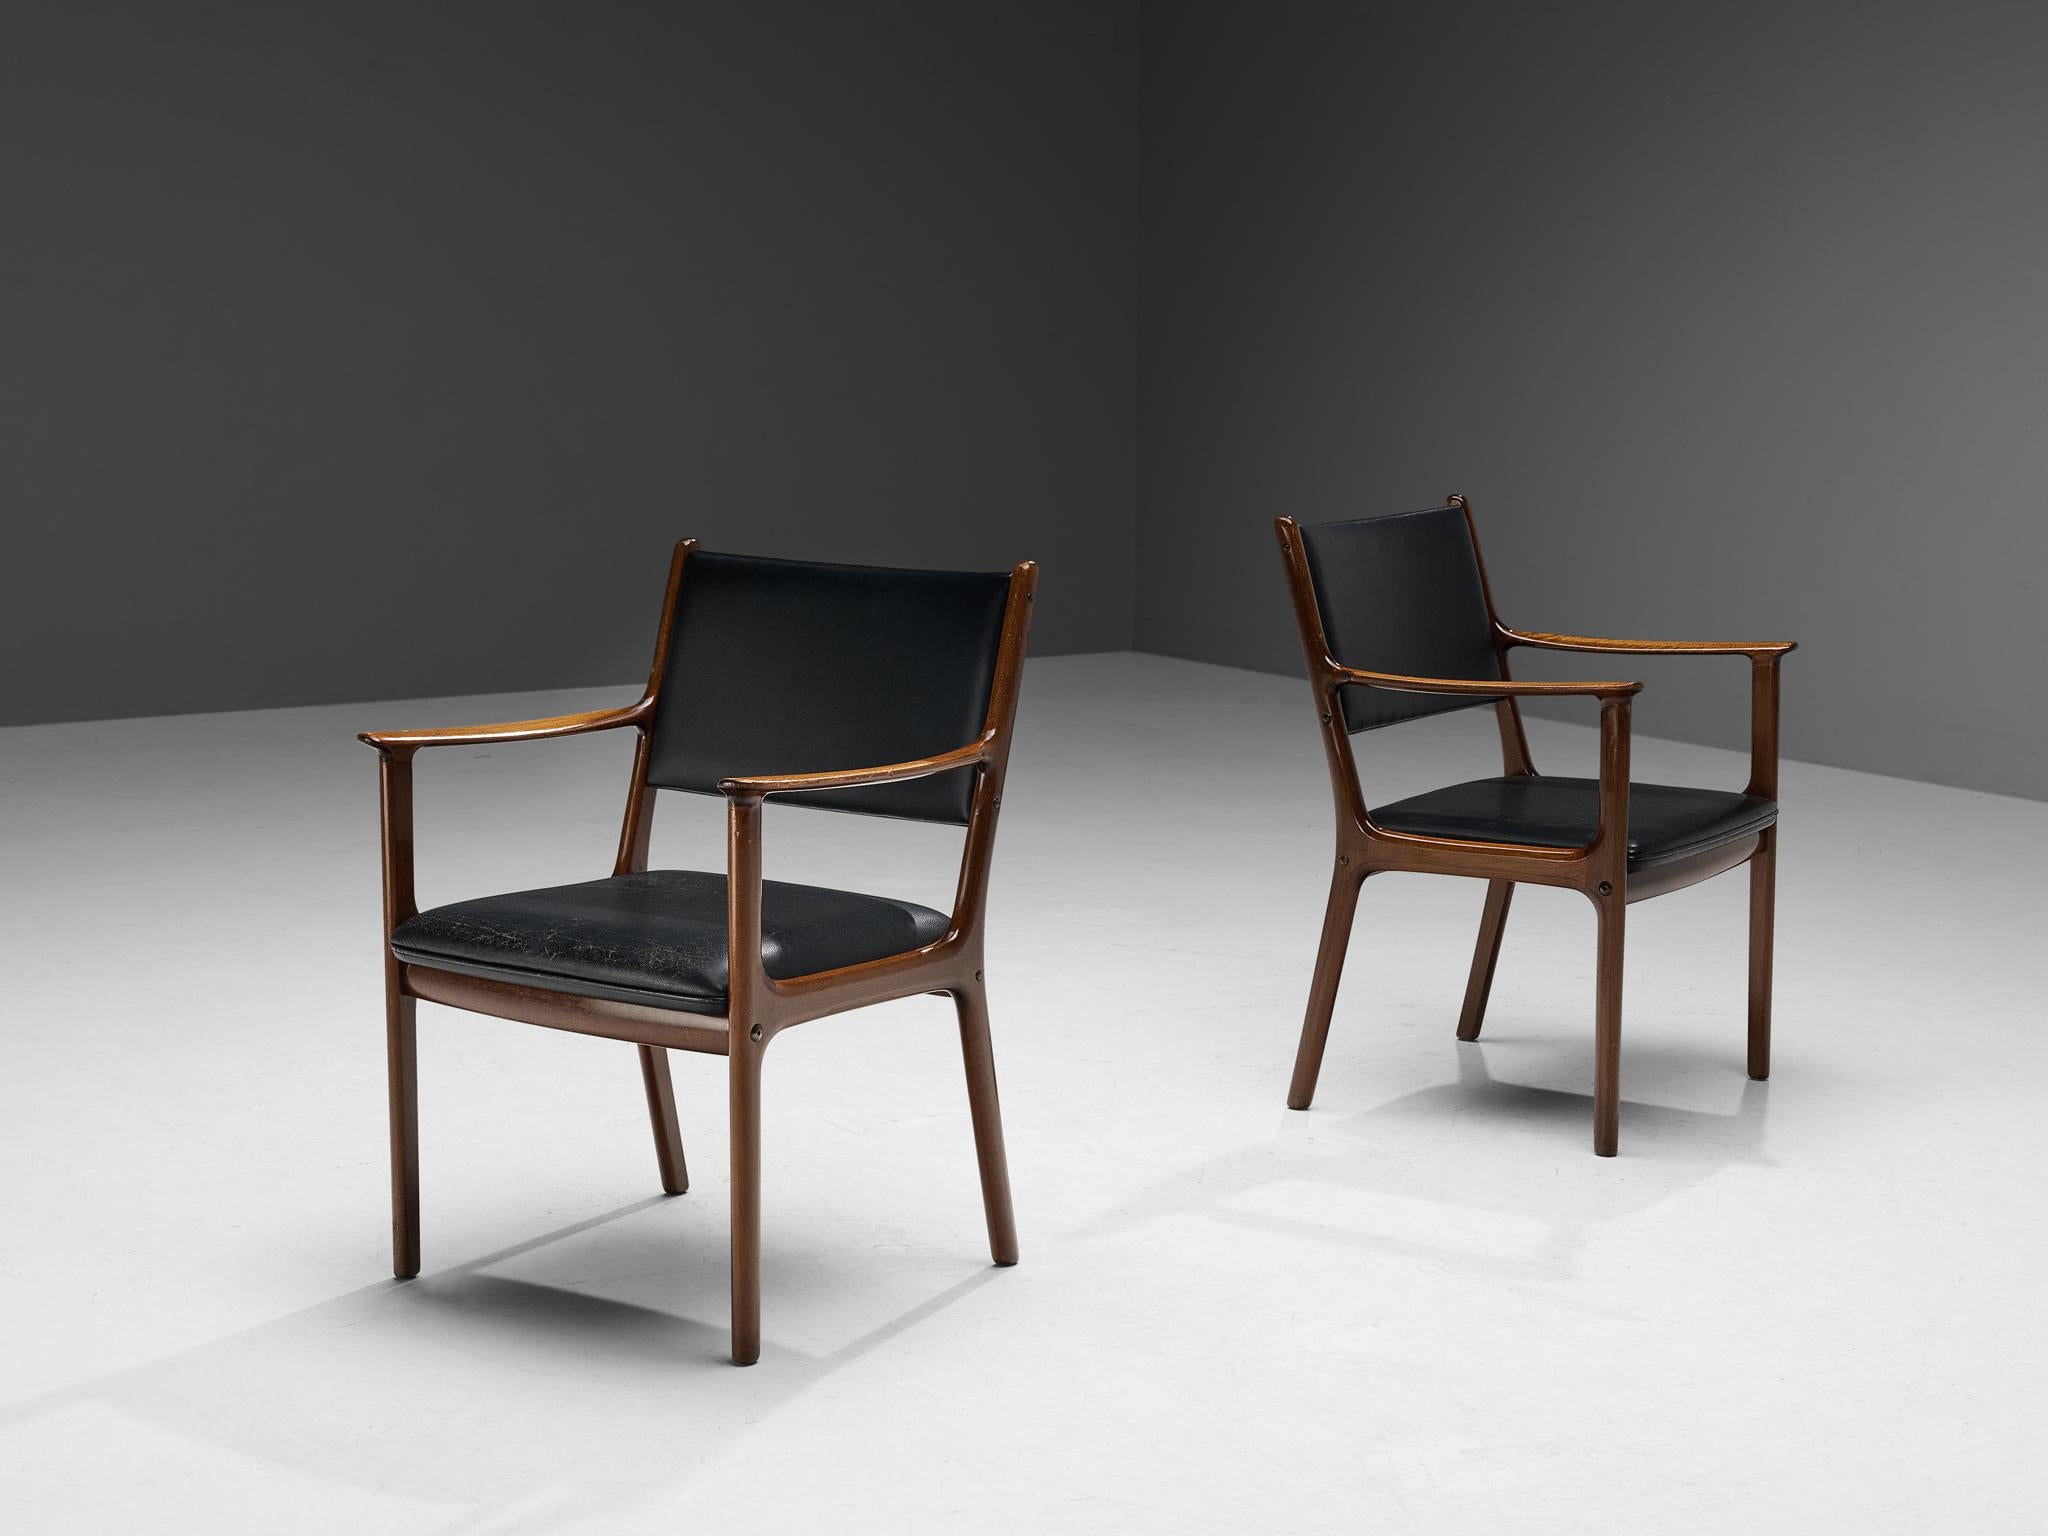 Ole Wanscher for P. Jeppesens Møbelfabrik, armchairs, model 'PJ412', teak, leather, Denmark, 1960s 

Modest pair of dining chairs designed by Ole Wanscher in the 1960s. These chairs are very comfortable thanks to the remarkable wide seats and the